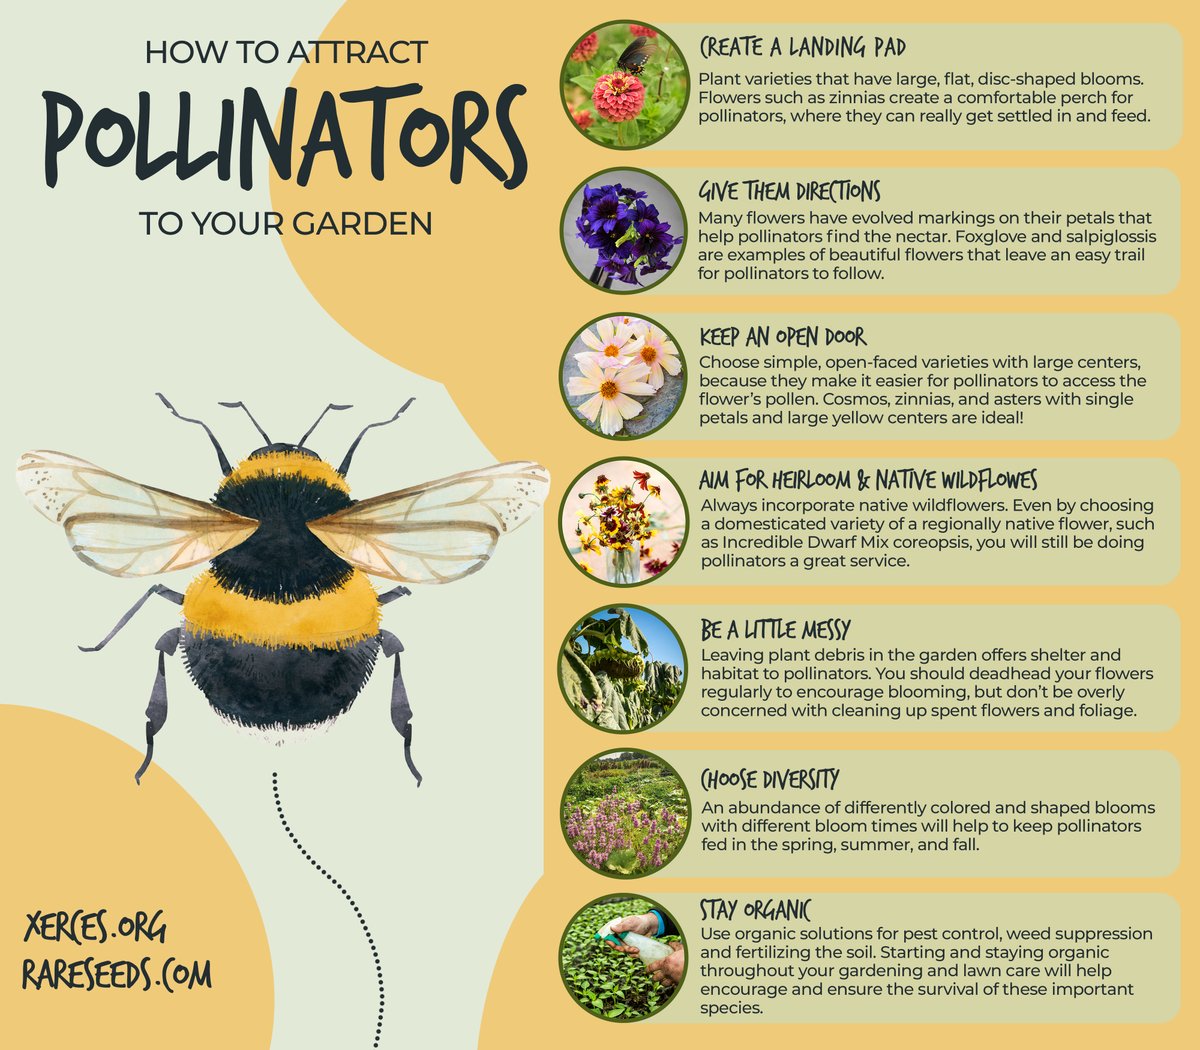 Remember the pollinators when planning your gardens!